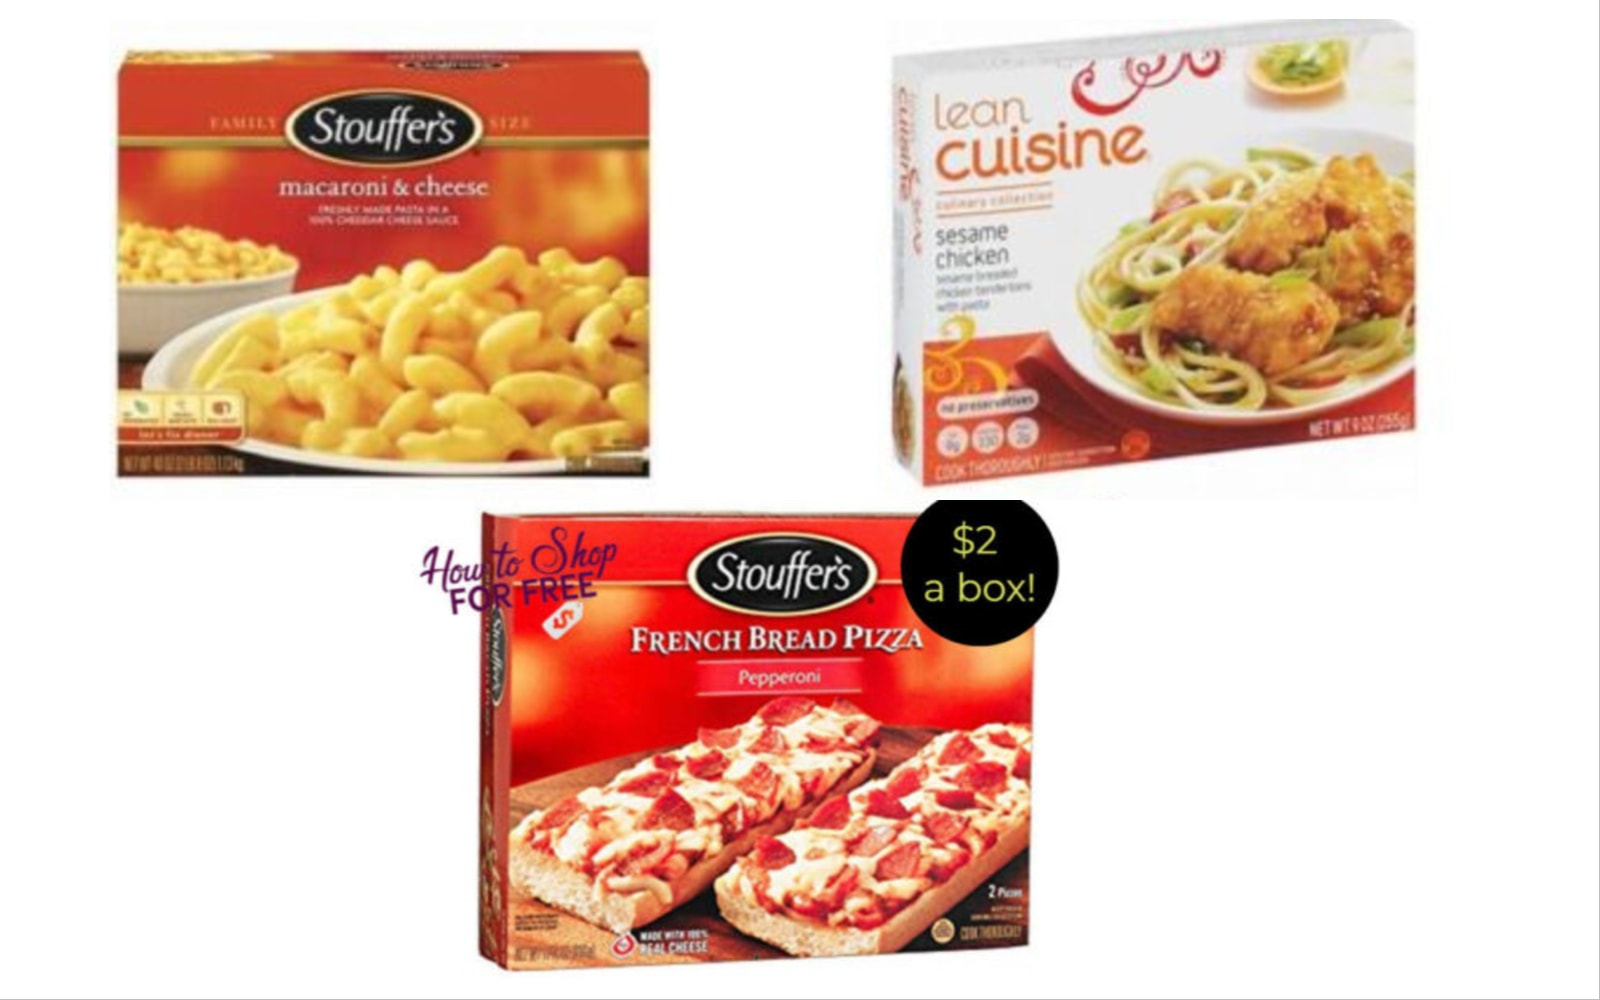 Mix or Match Savings on Stouffers and Lean Cuisines! 7/19-7/25 | How to Shop For Free Kathy Spencer